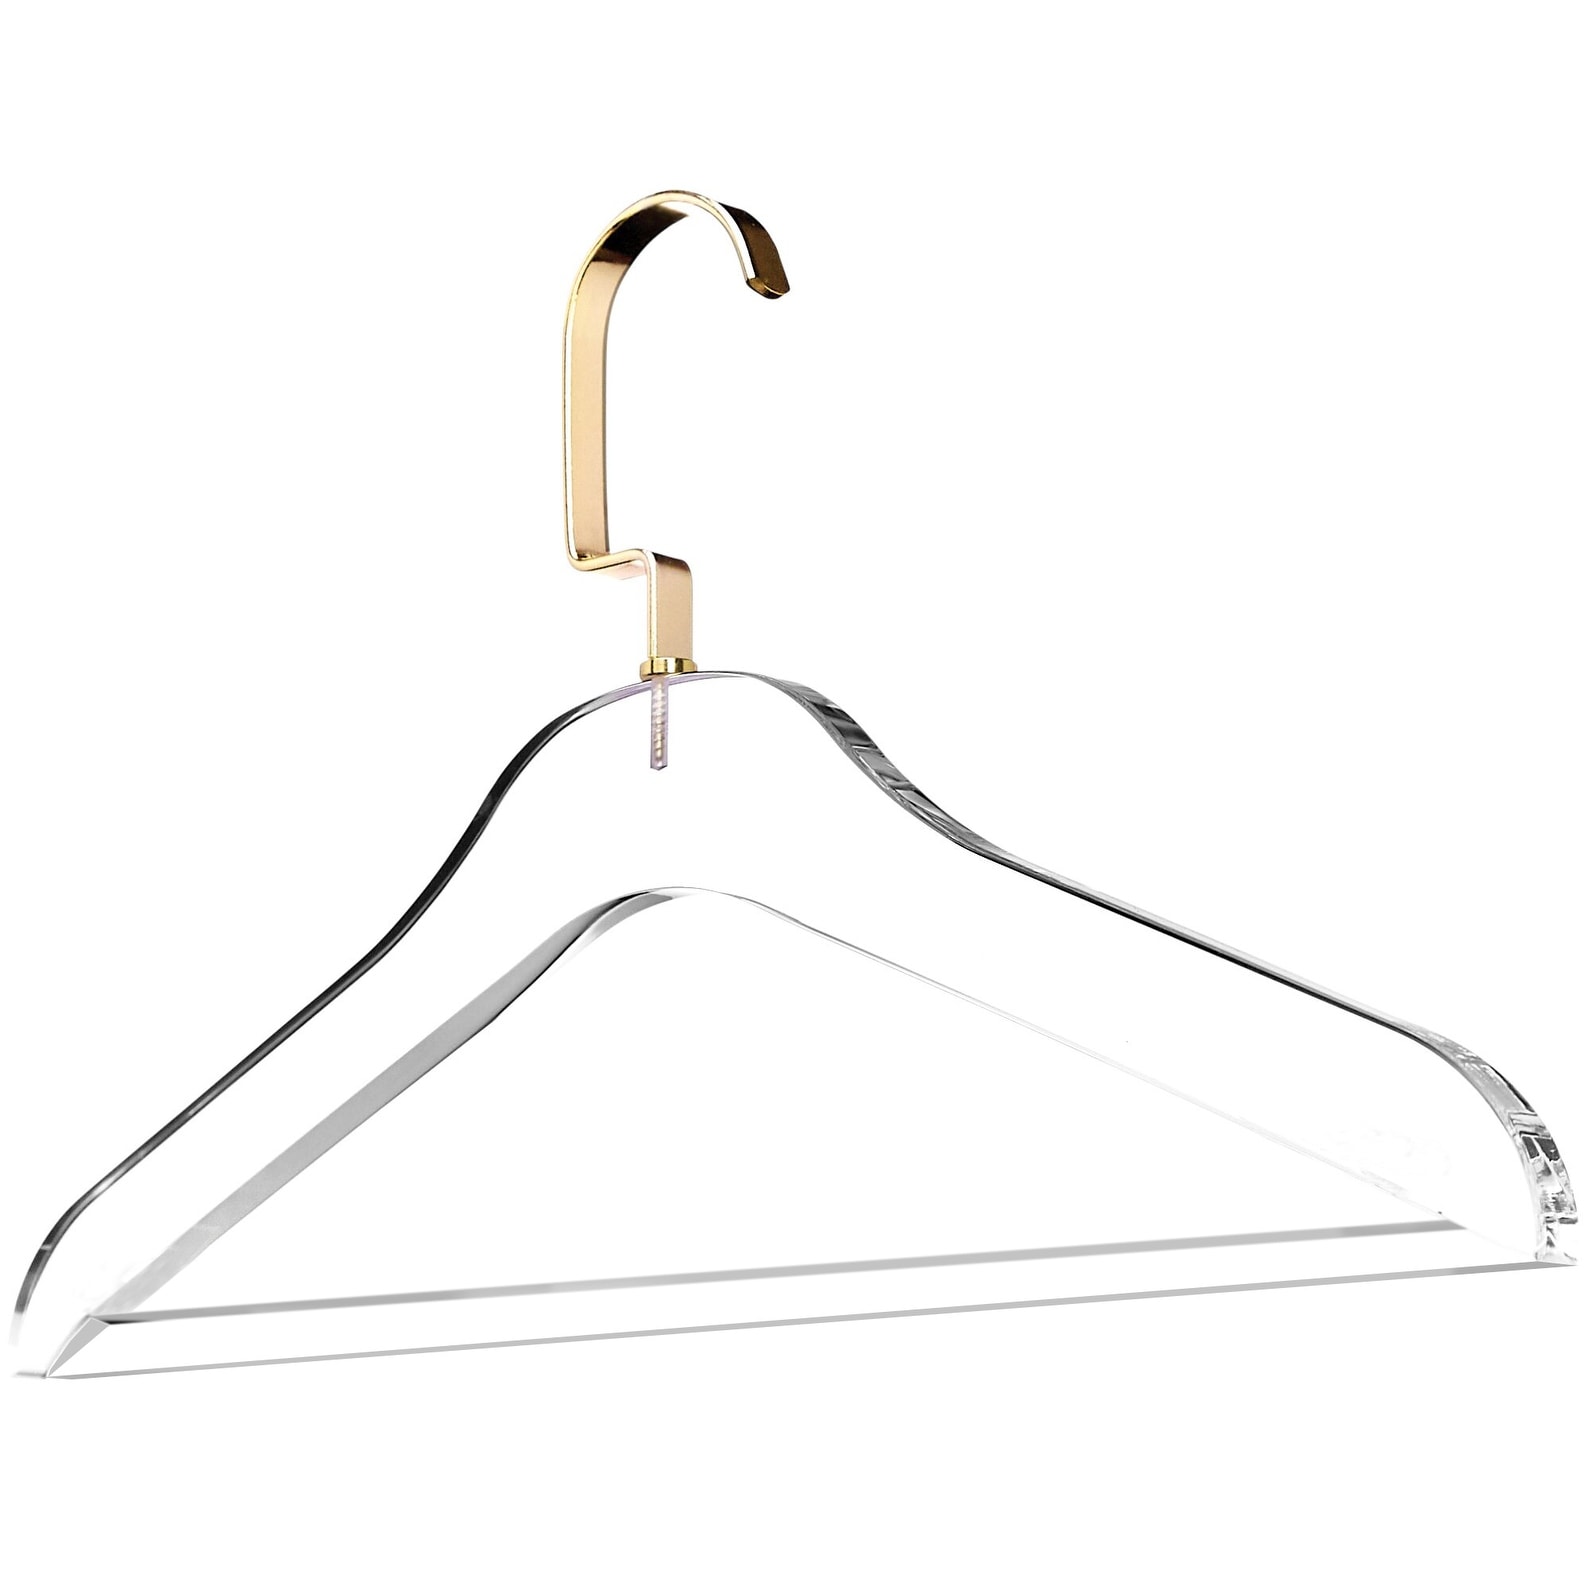 https://ak1.ostkcdn.com/images/products/is/images/direct/aa1bf969894a45f3475cbdcd62a672fe83599d8b/DesignStyles-Clear-Acrylic-Clothes-Hangers-w-Pants-Bar---10-Pk.jpg